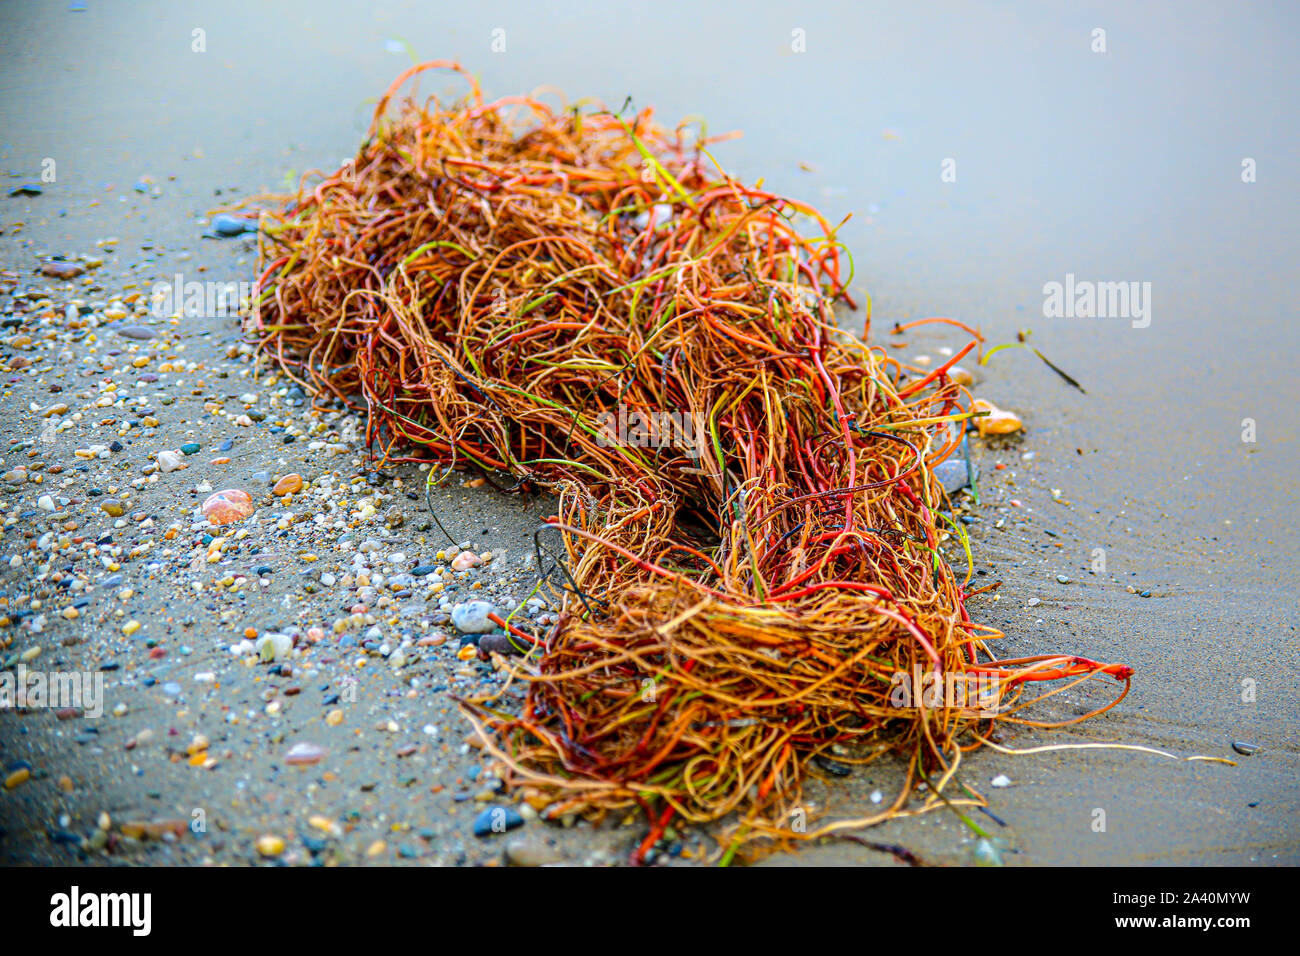 Colourful Sea Weed On The Beach Stock Photo